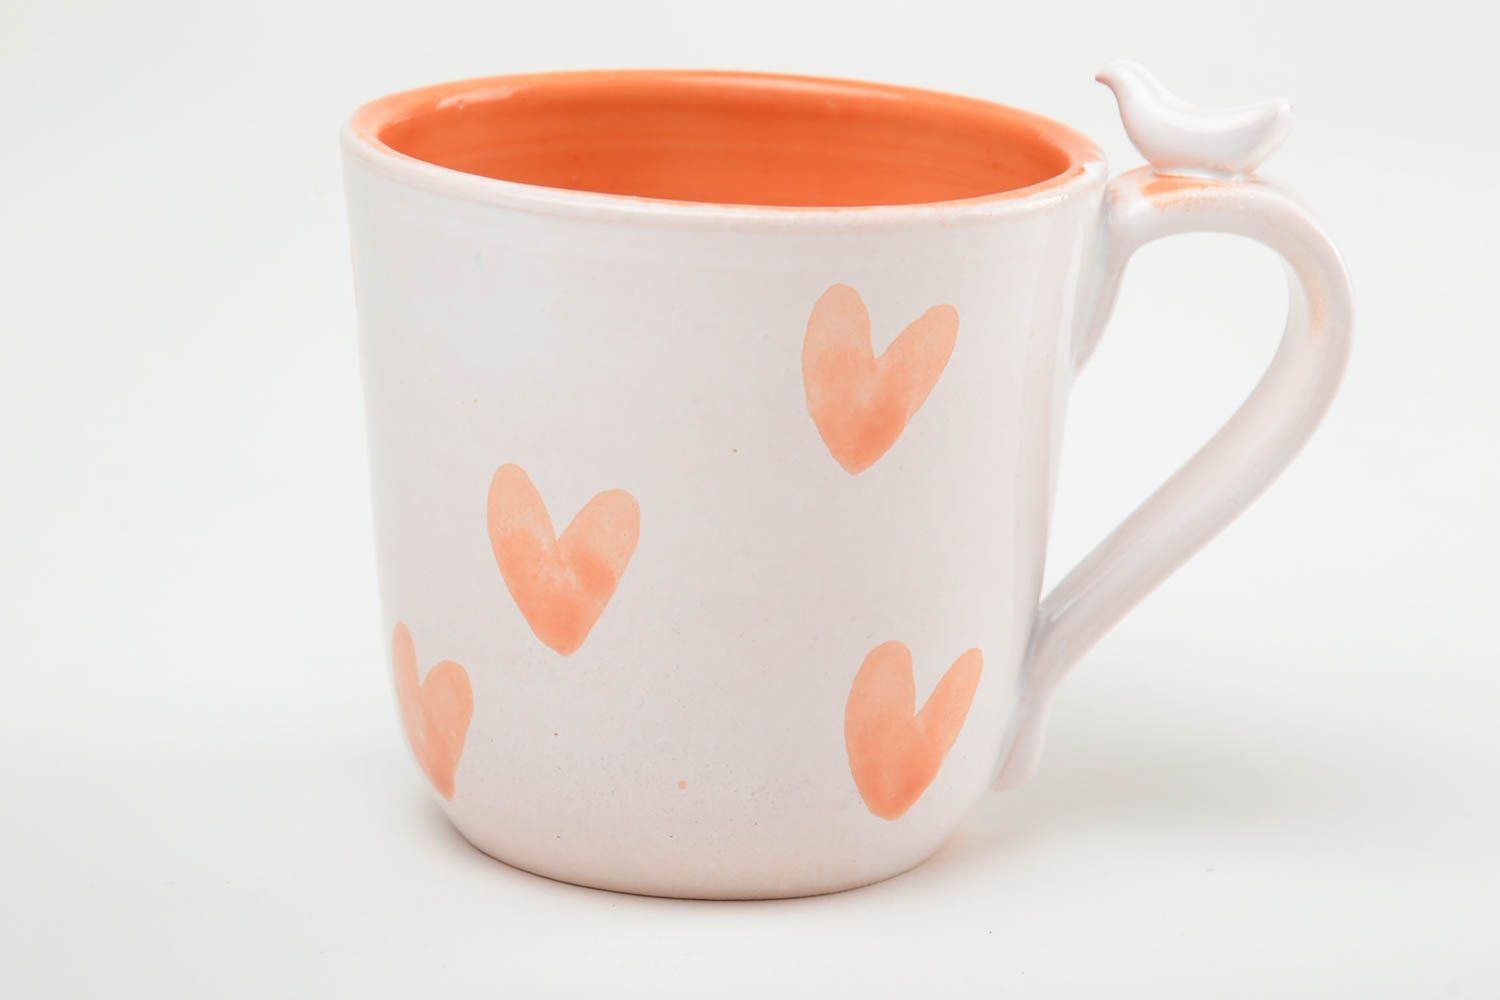 11 oz art ceramic white and orange cup with handle and hearts pattern photo 3